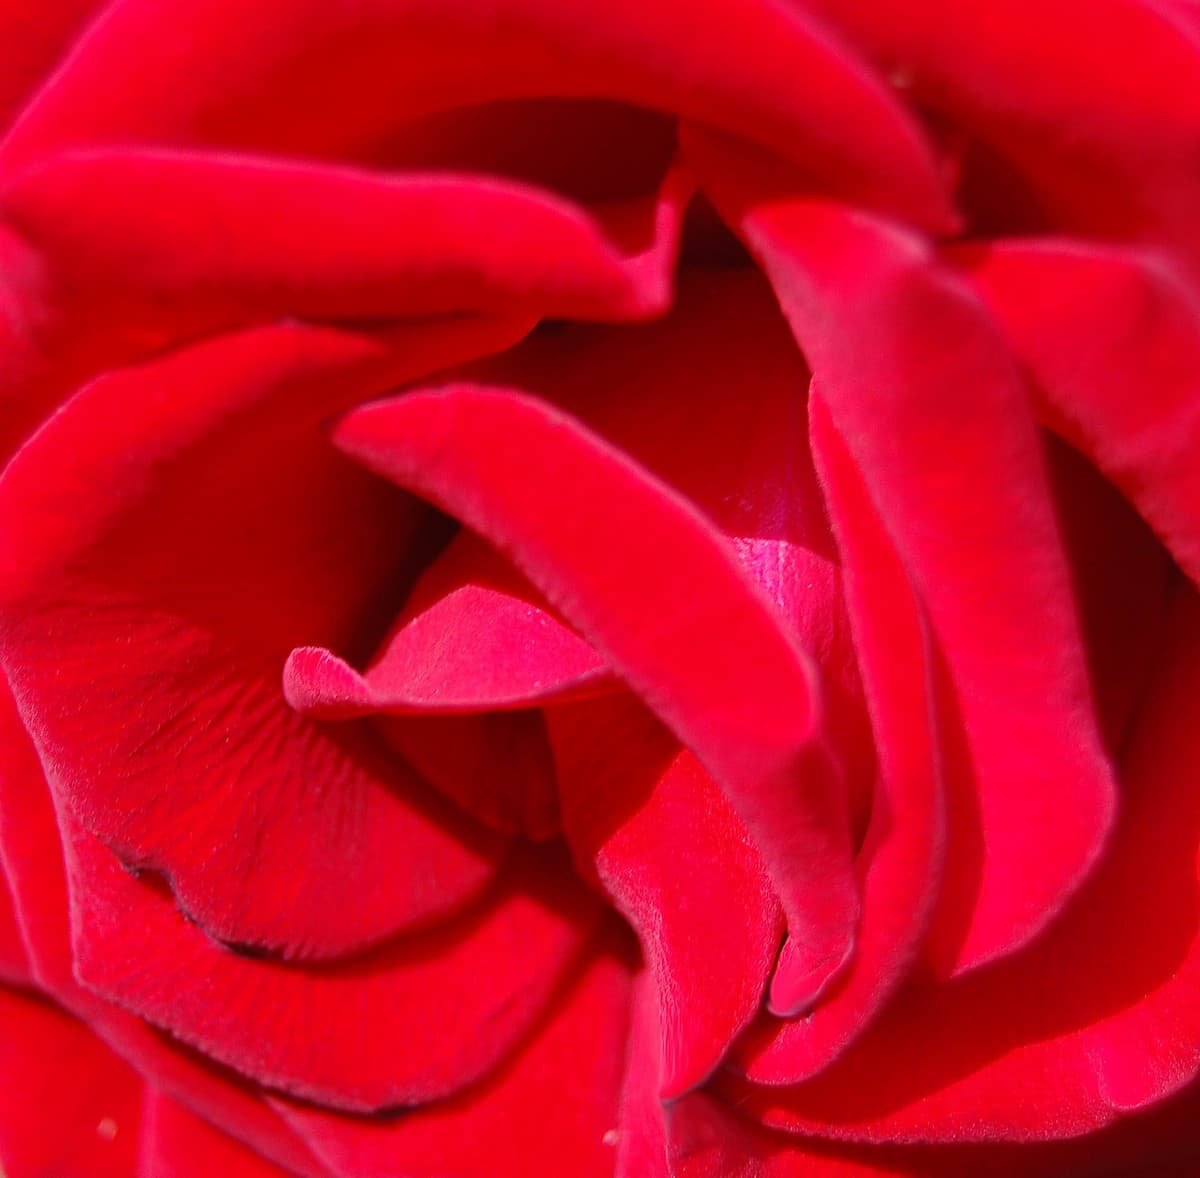 Red rose close up photograph on a blank greetings card.